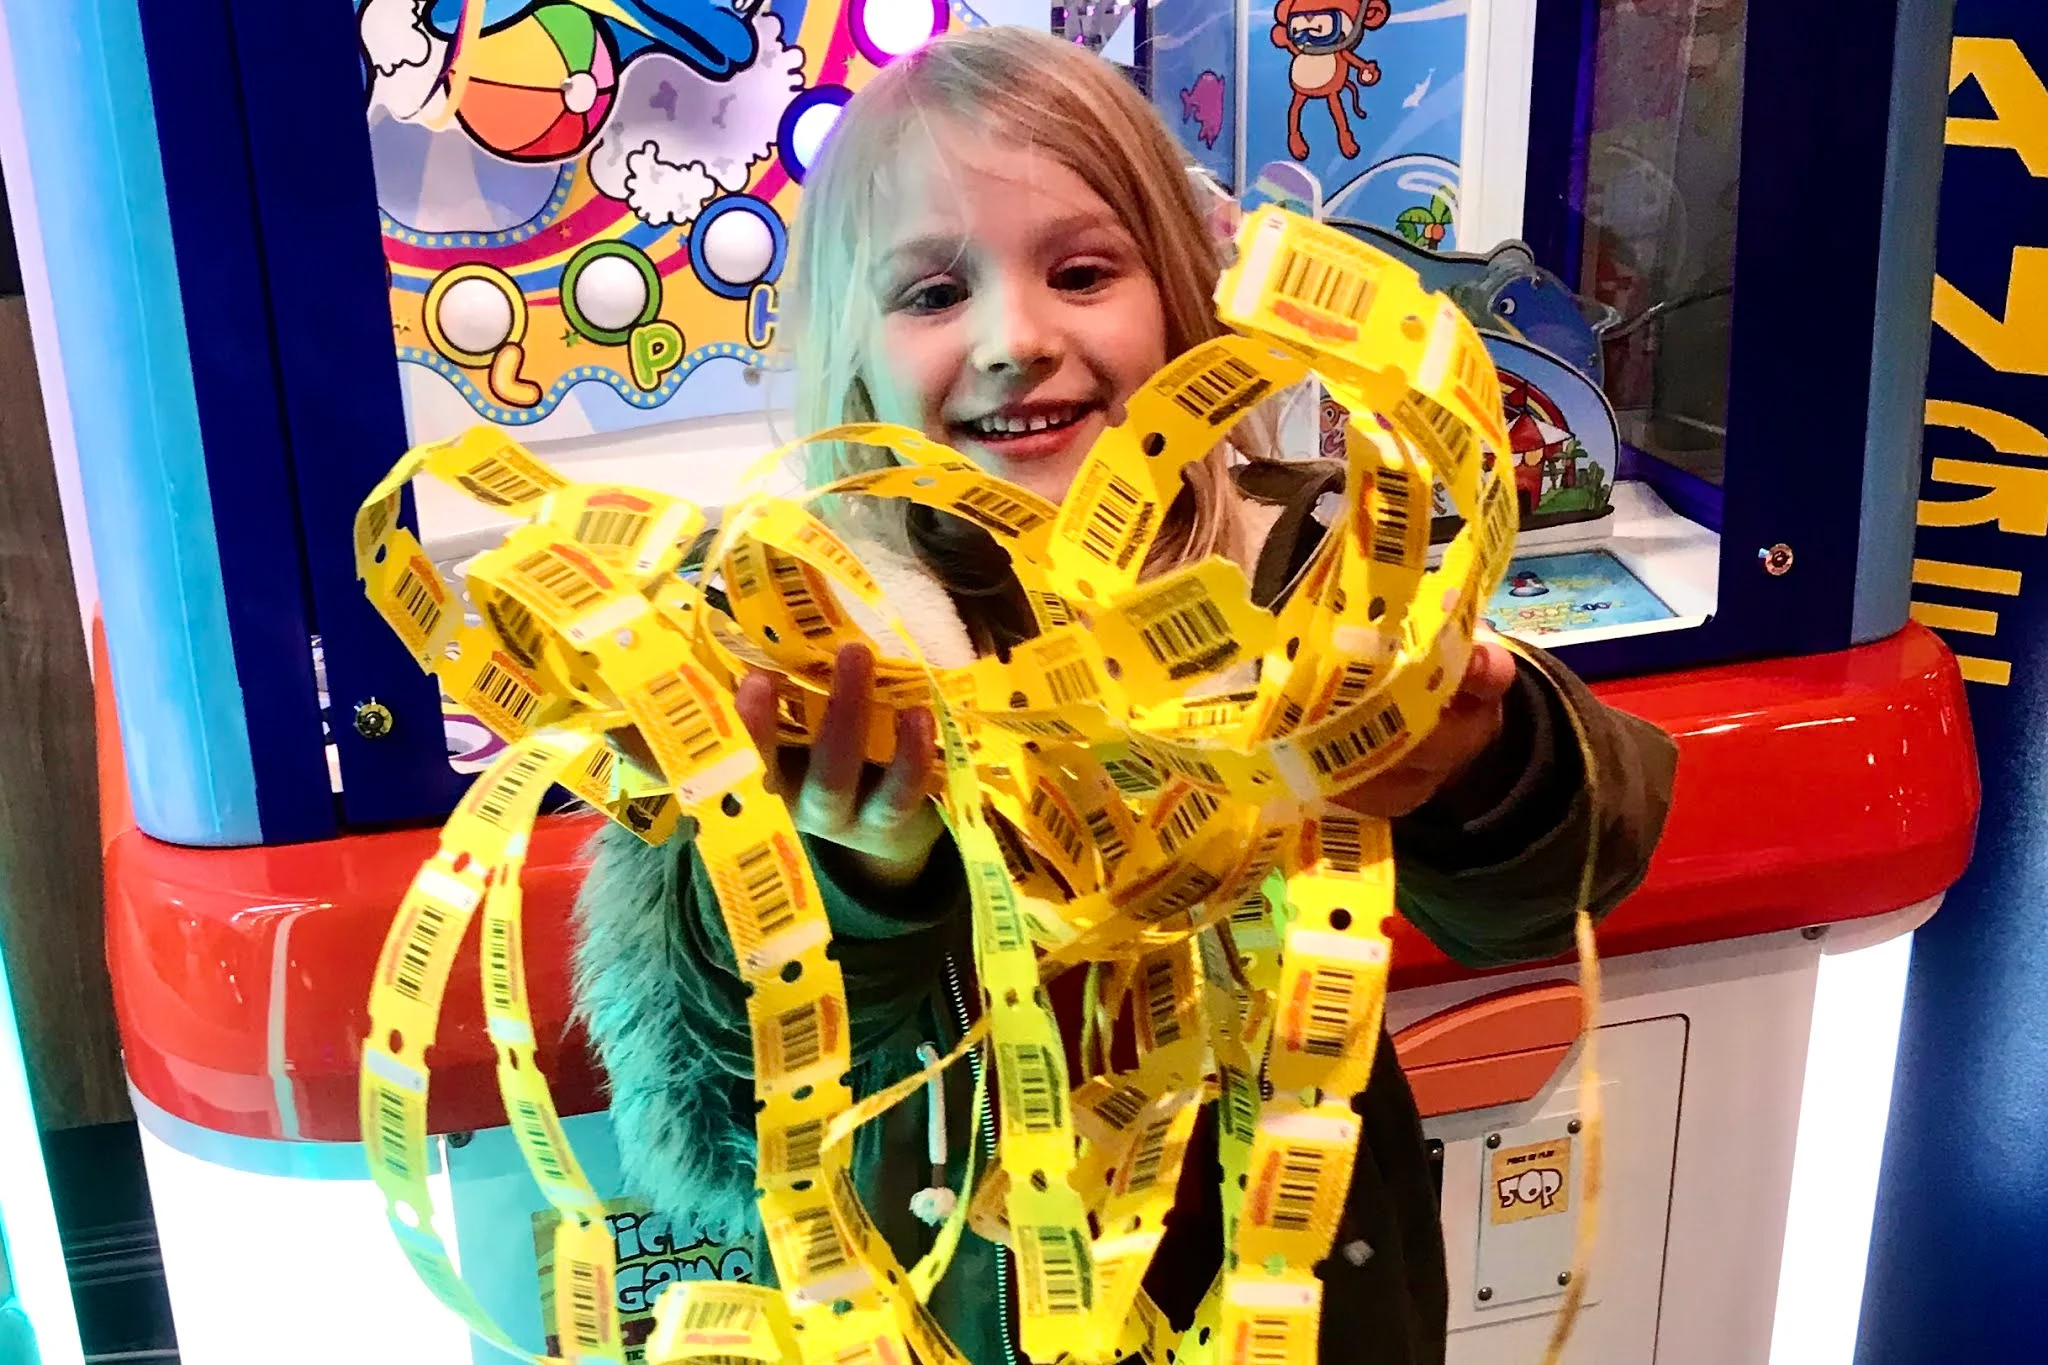 A girl holding an armful of winning tickets from an arcade machine